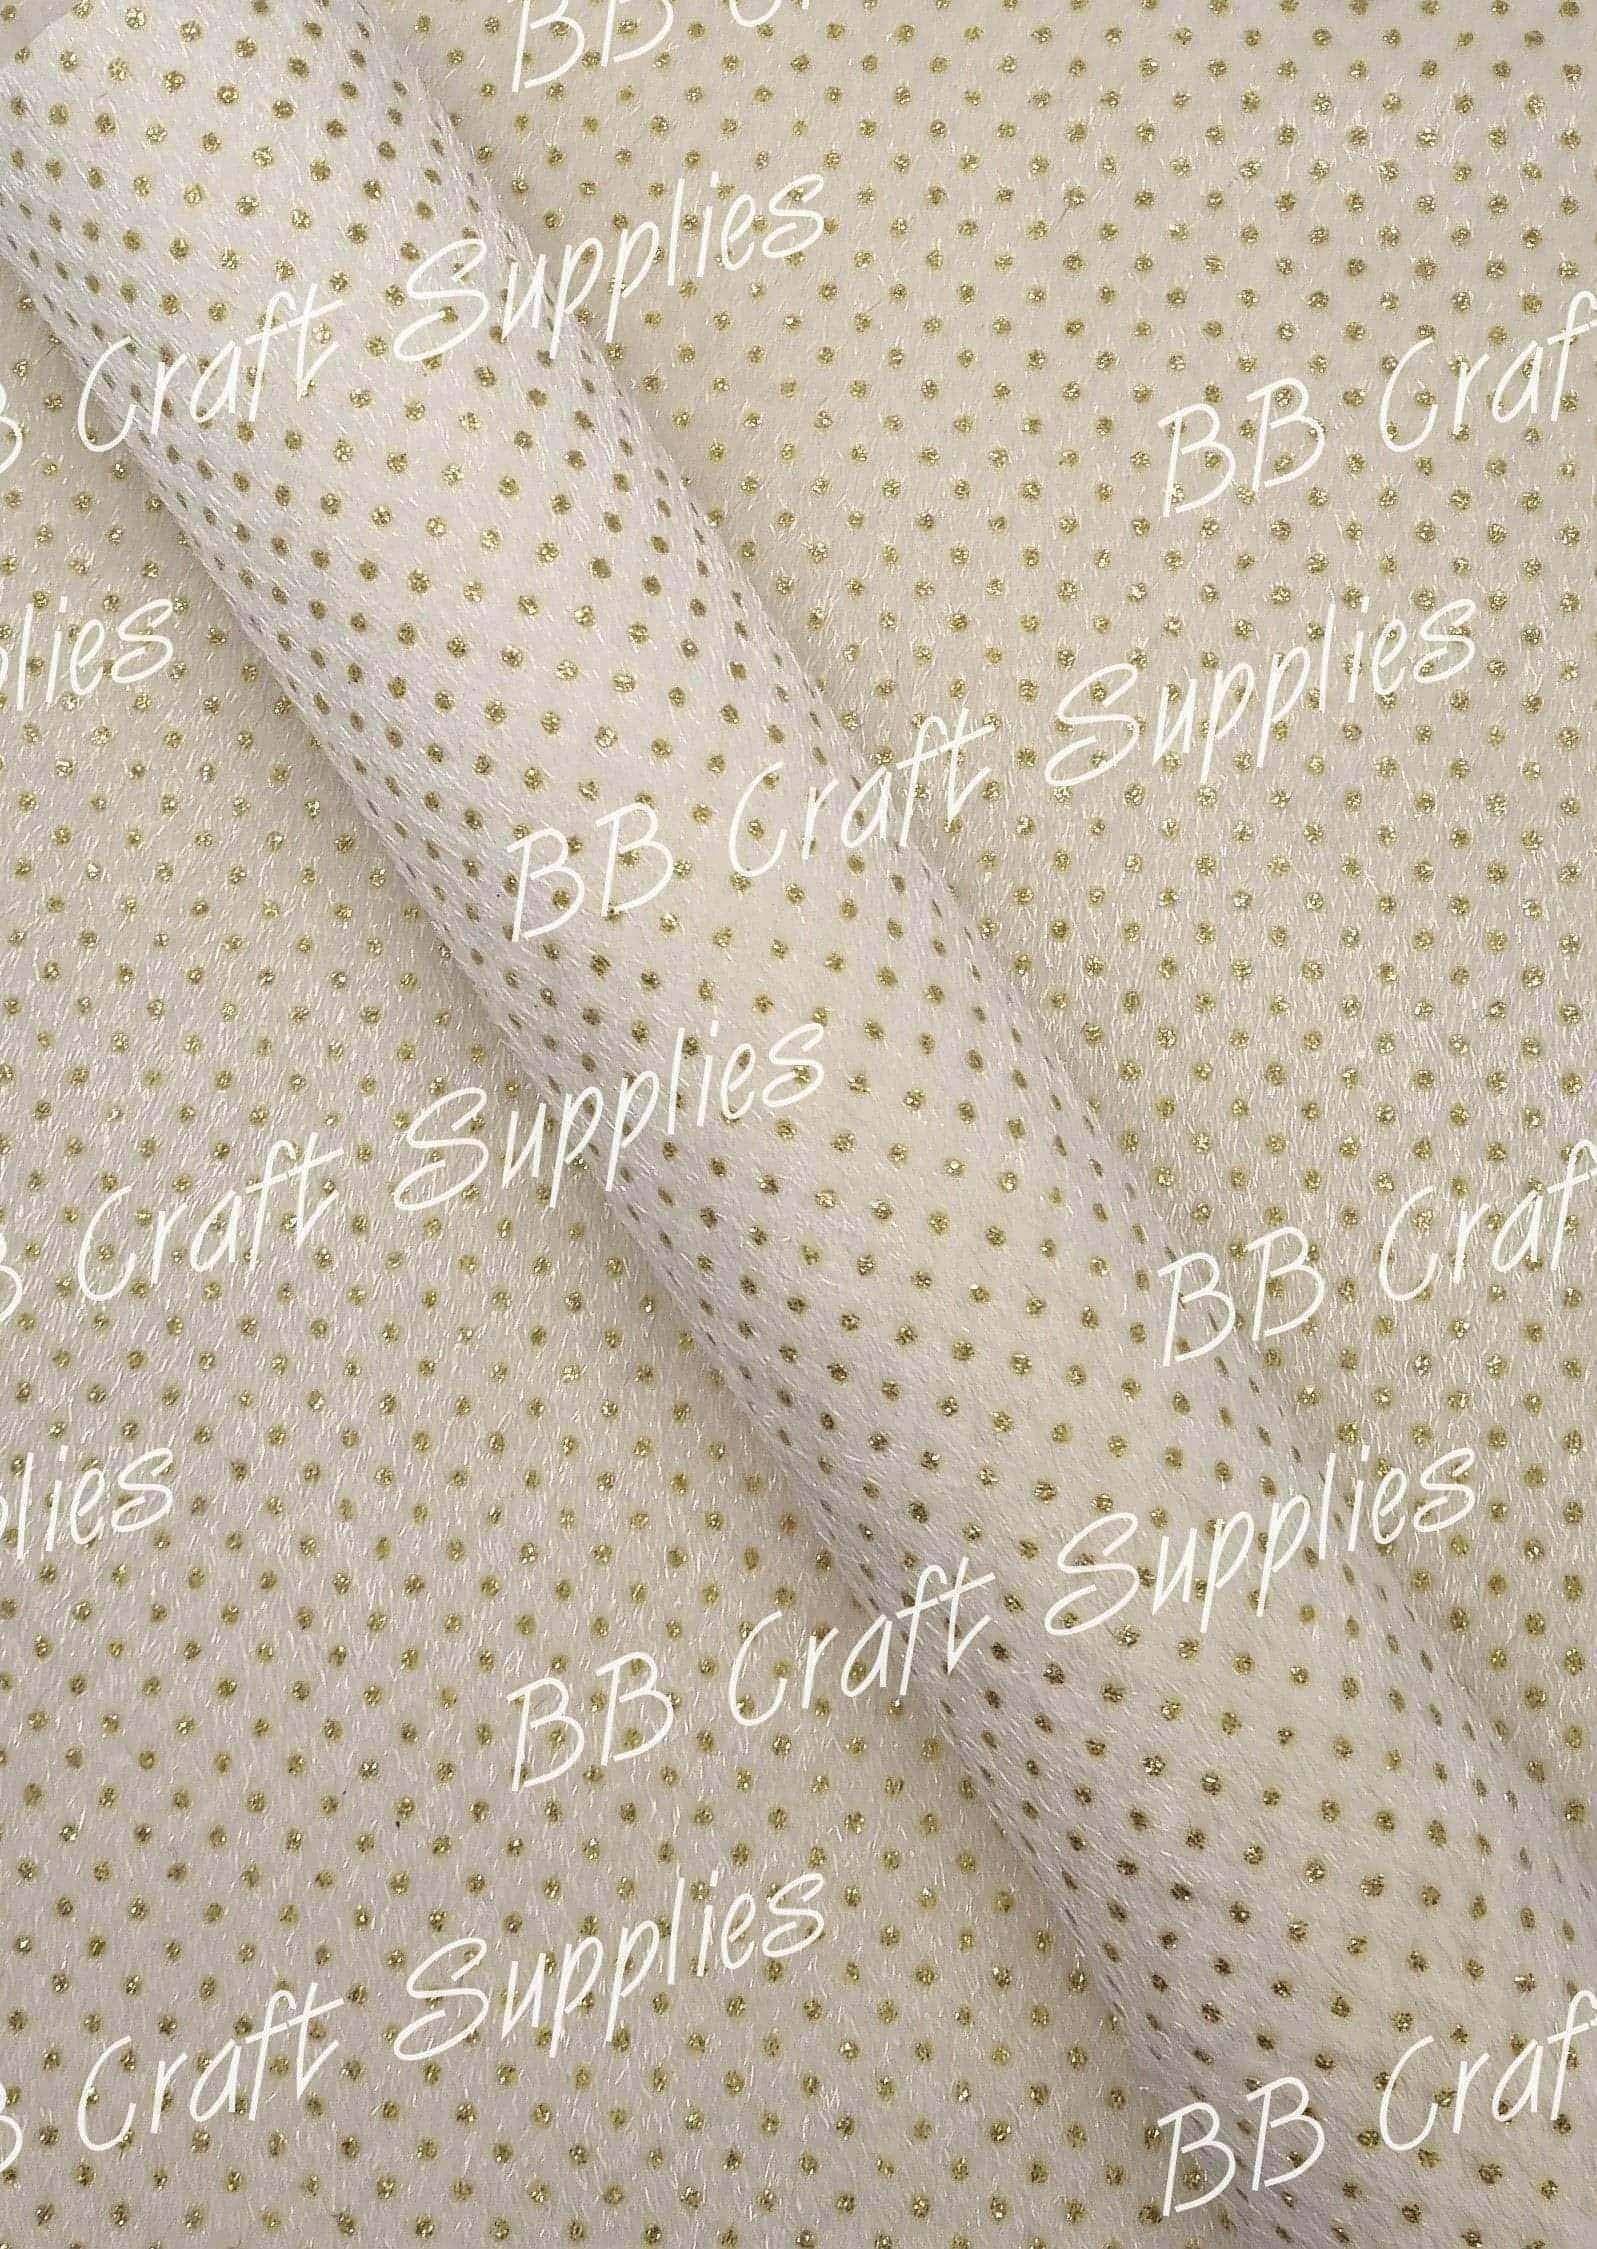 Faux Flocking Fabric Cream & Gold Spots - dots, Faux, Faux Leather, flocking, fluffy, gold, red, spots, valentines - Bare Butler Faux Leather Supplies 